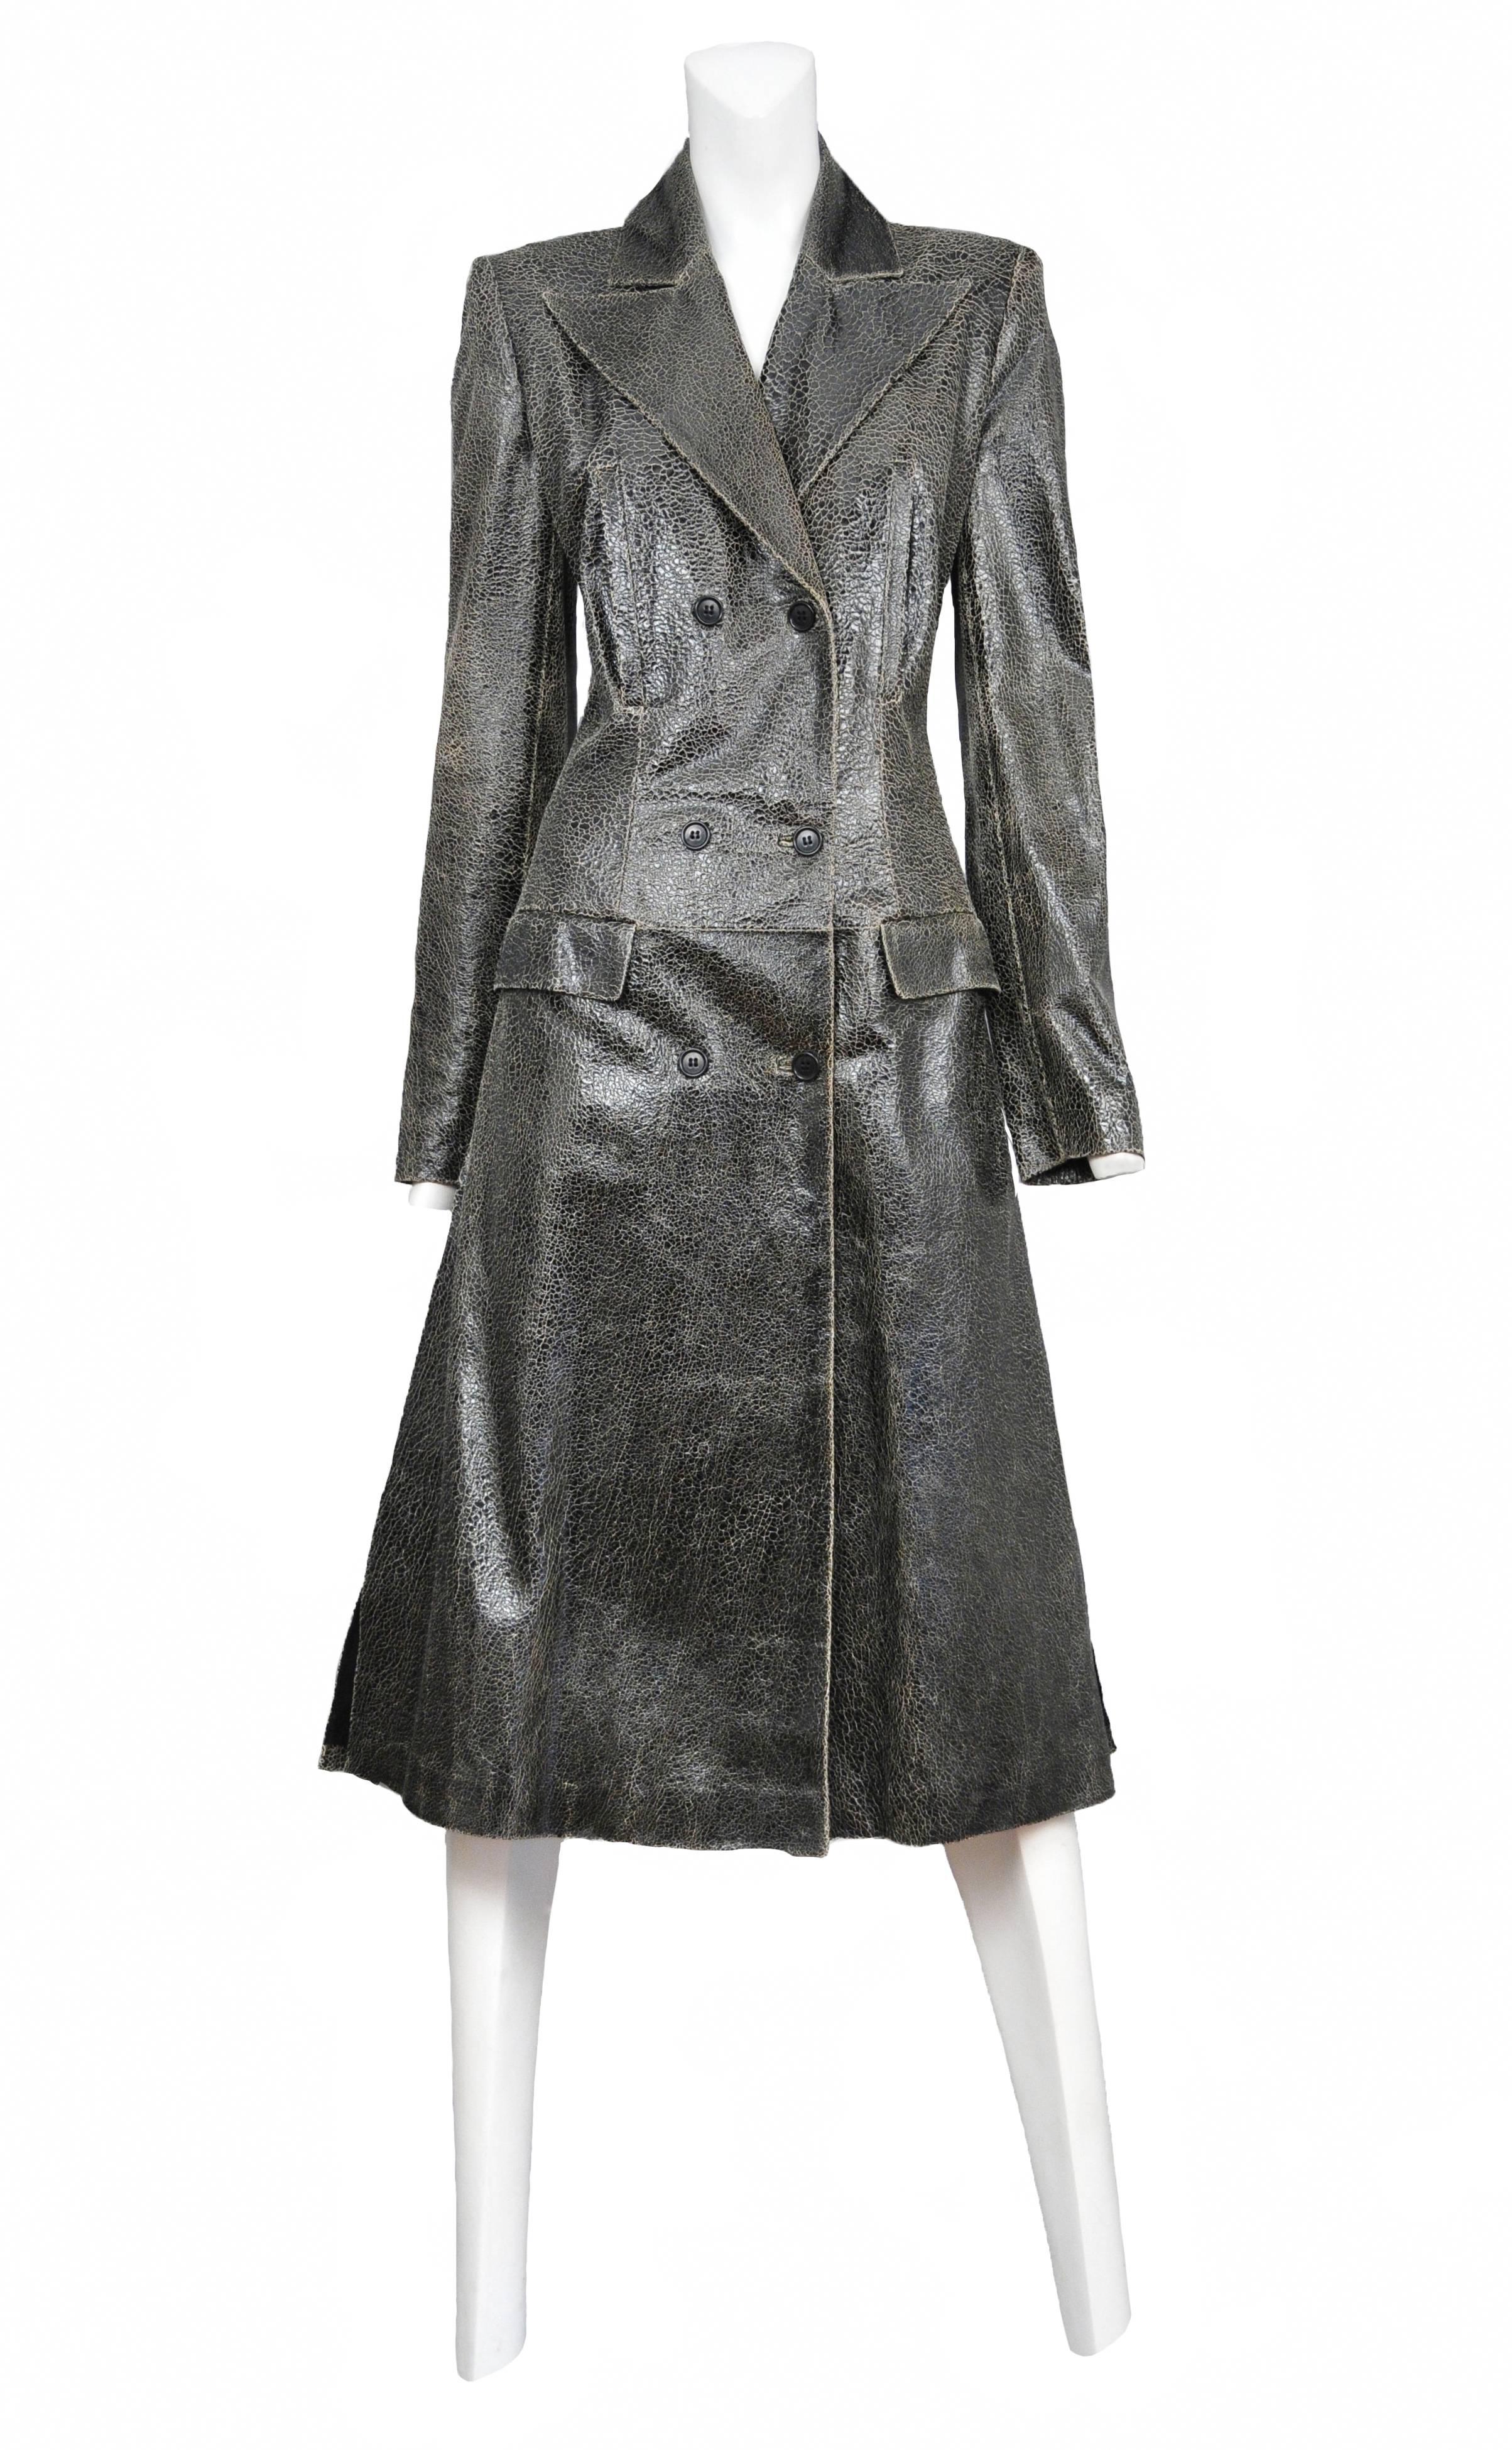 Crackled or distressed black leather double breasted coat with chest pockets. Look #9 1999 AW

Please contact for additional photos or information